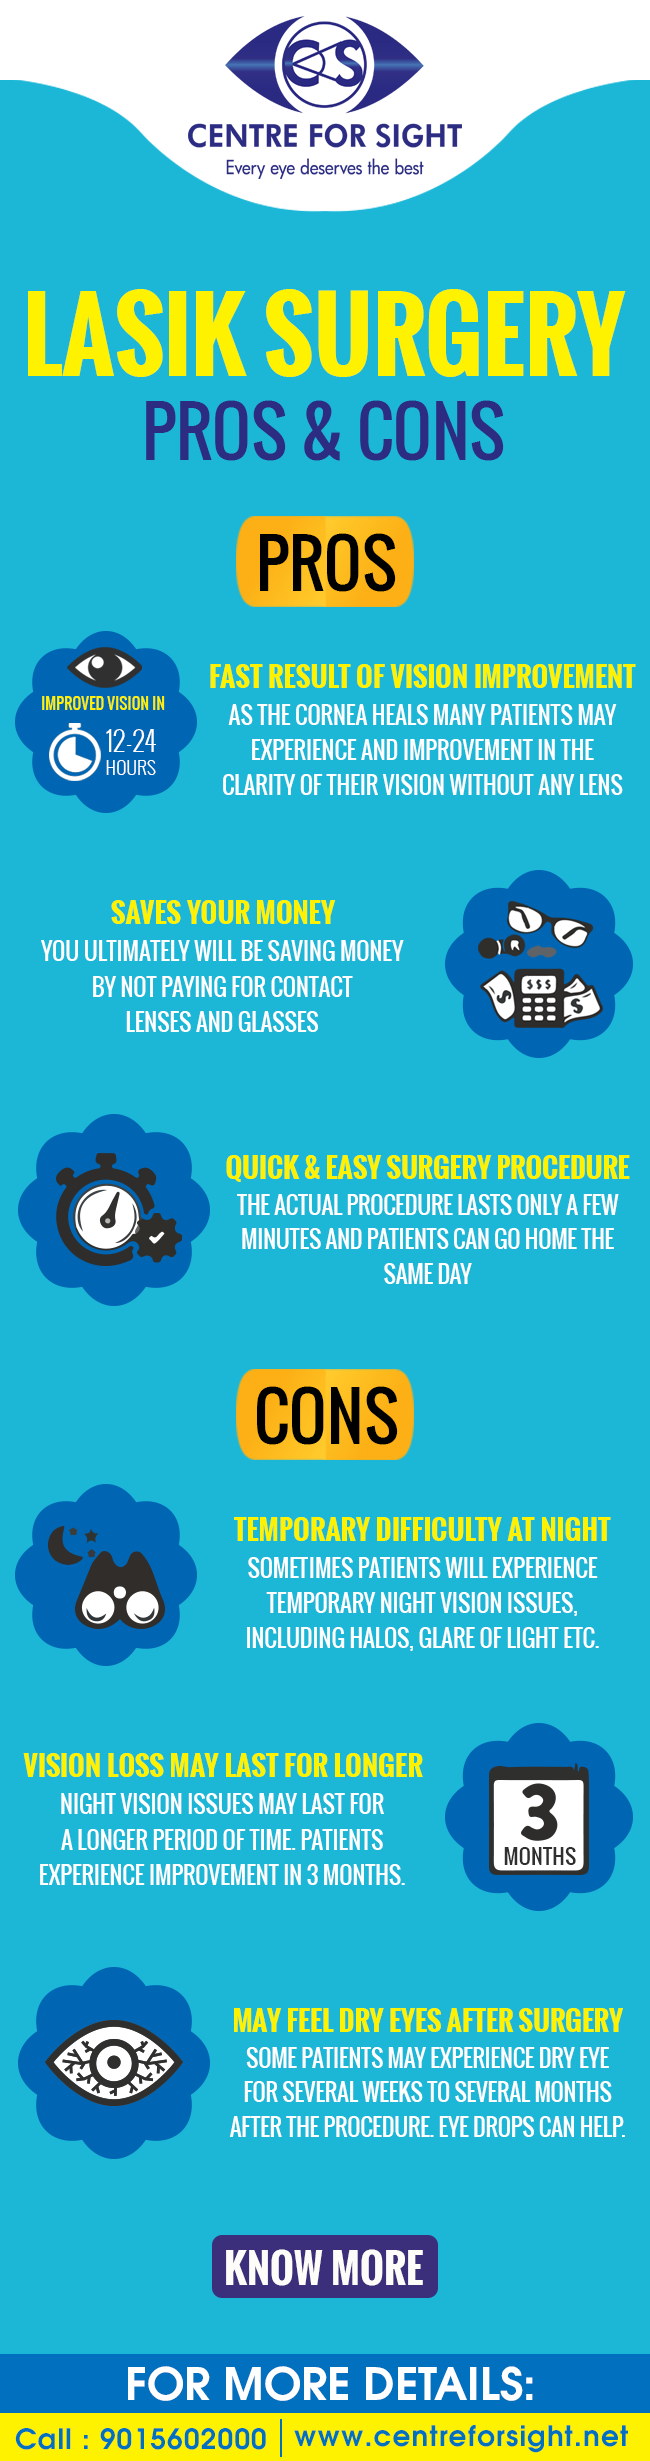 lasik-surgery.png  by centreforsight